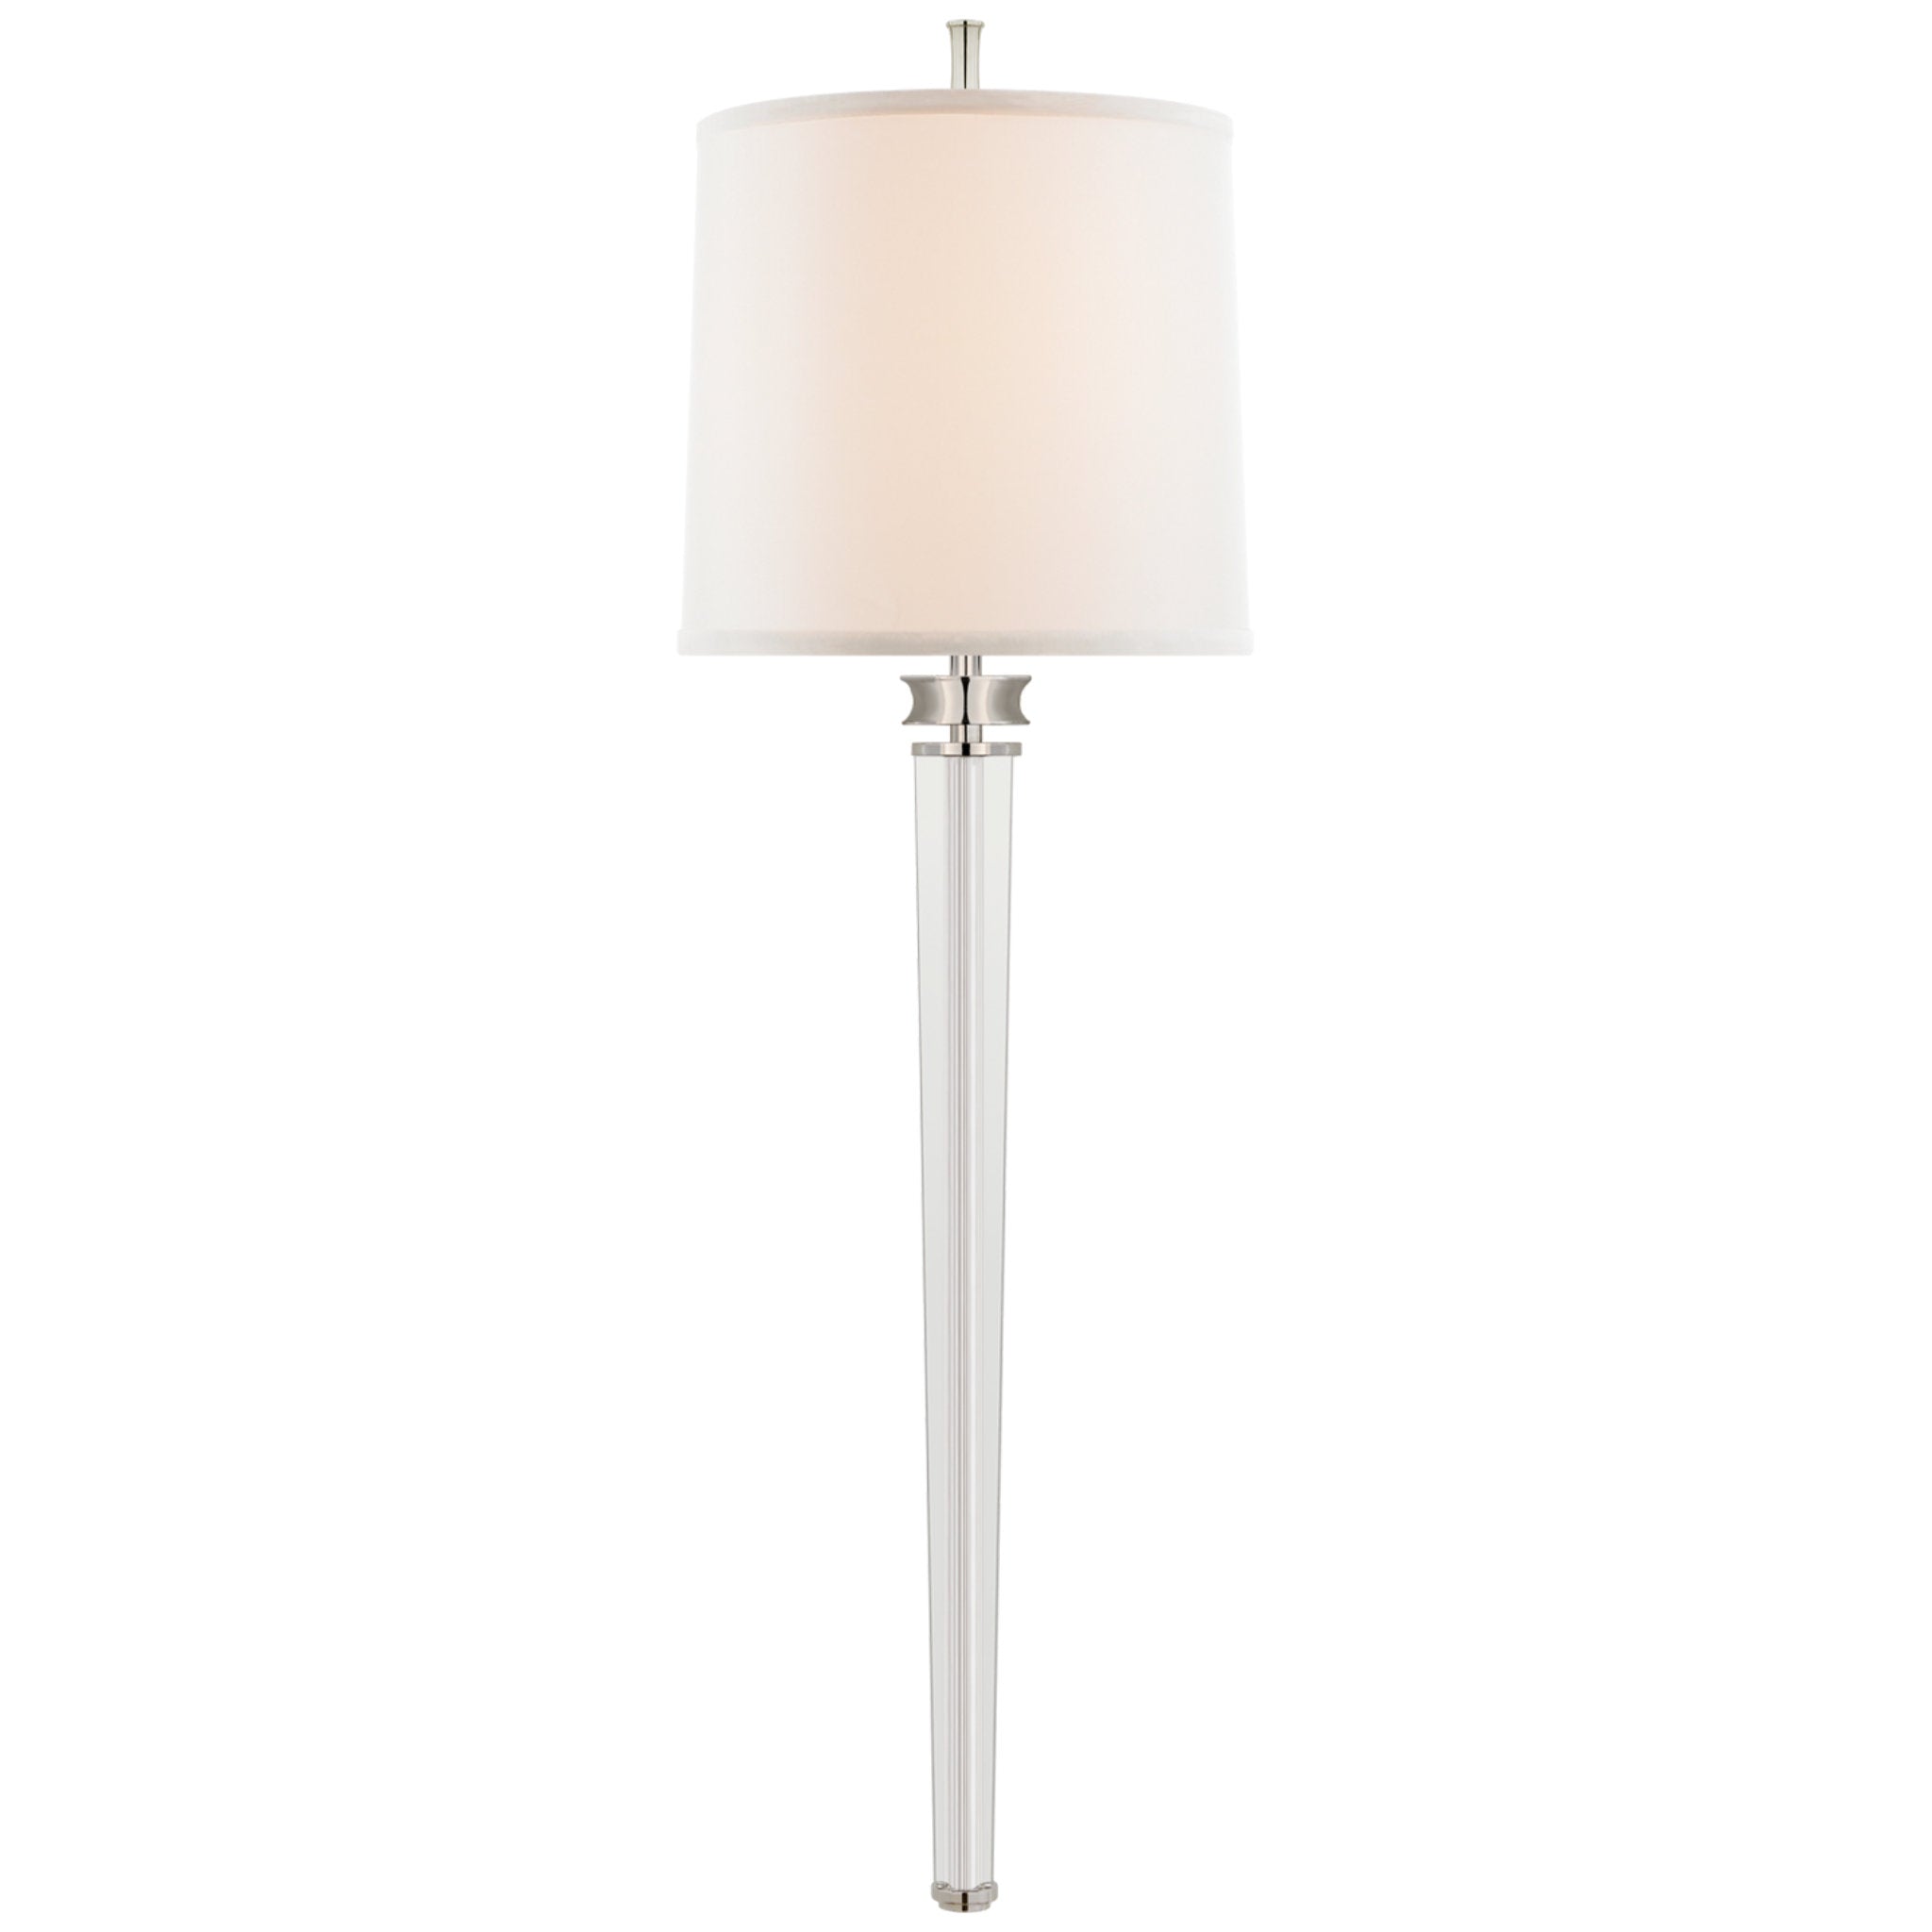 Thomas O'Brien Lyra Large Tail Sconce in Polished Nickel and Crystal with Linen Shade